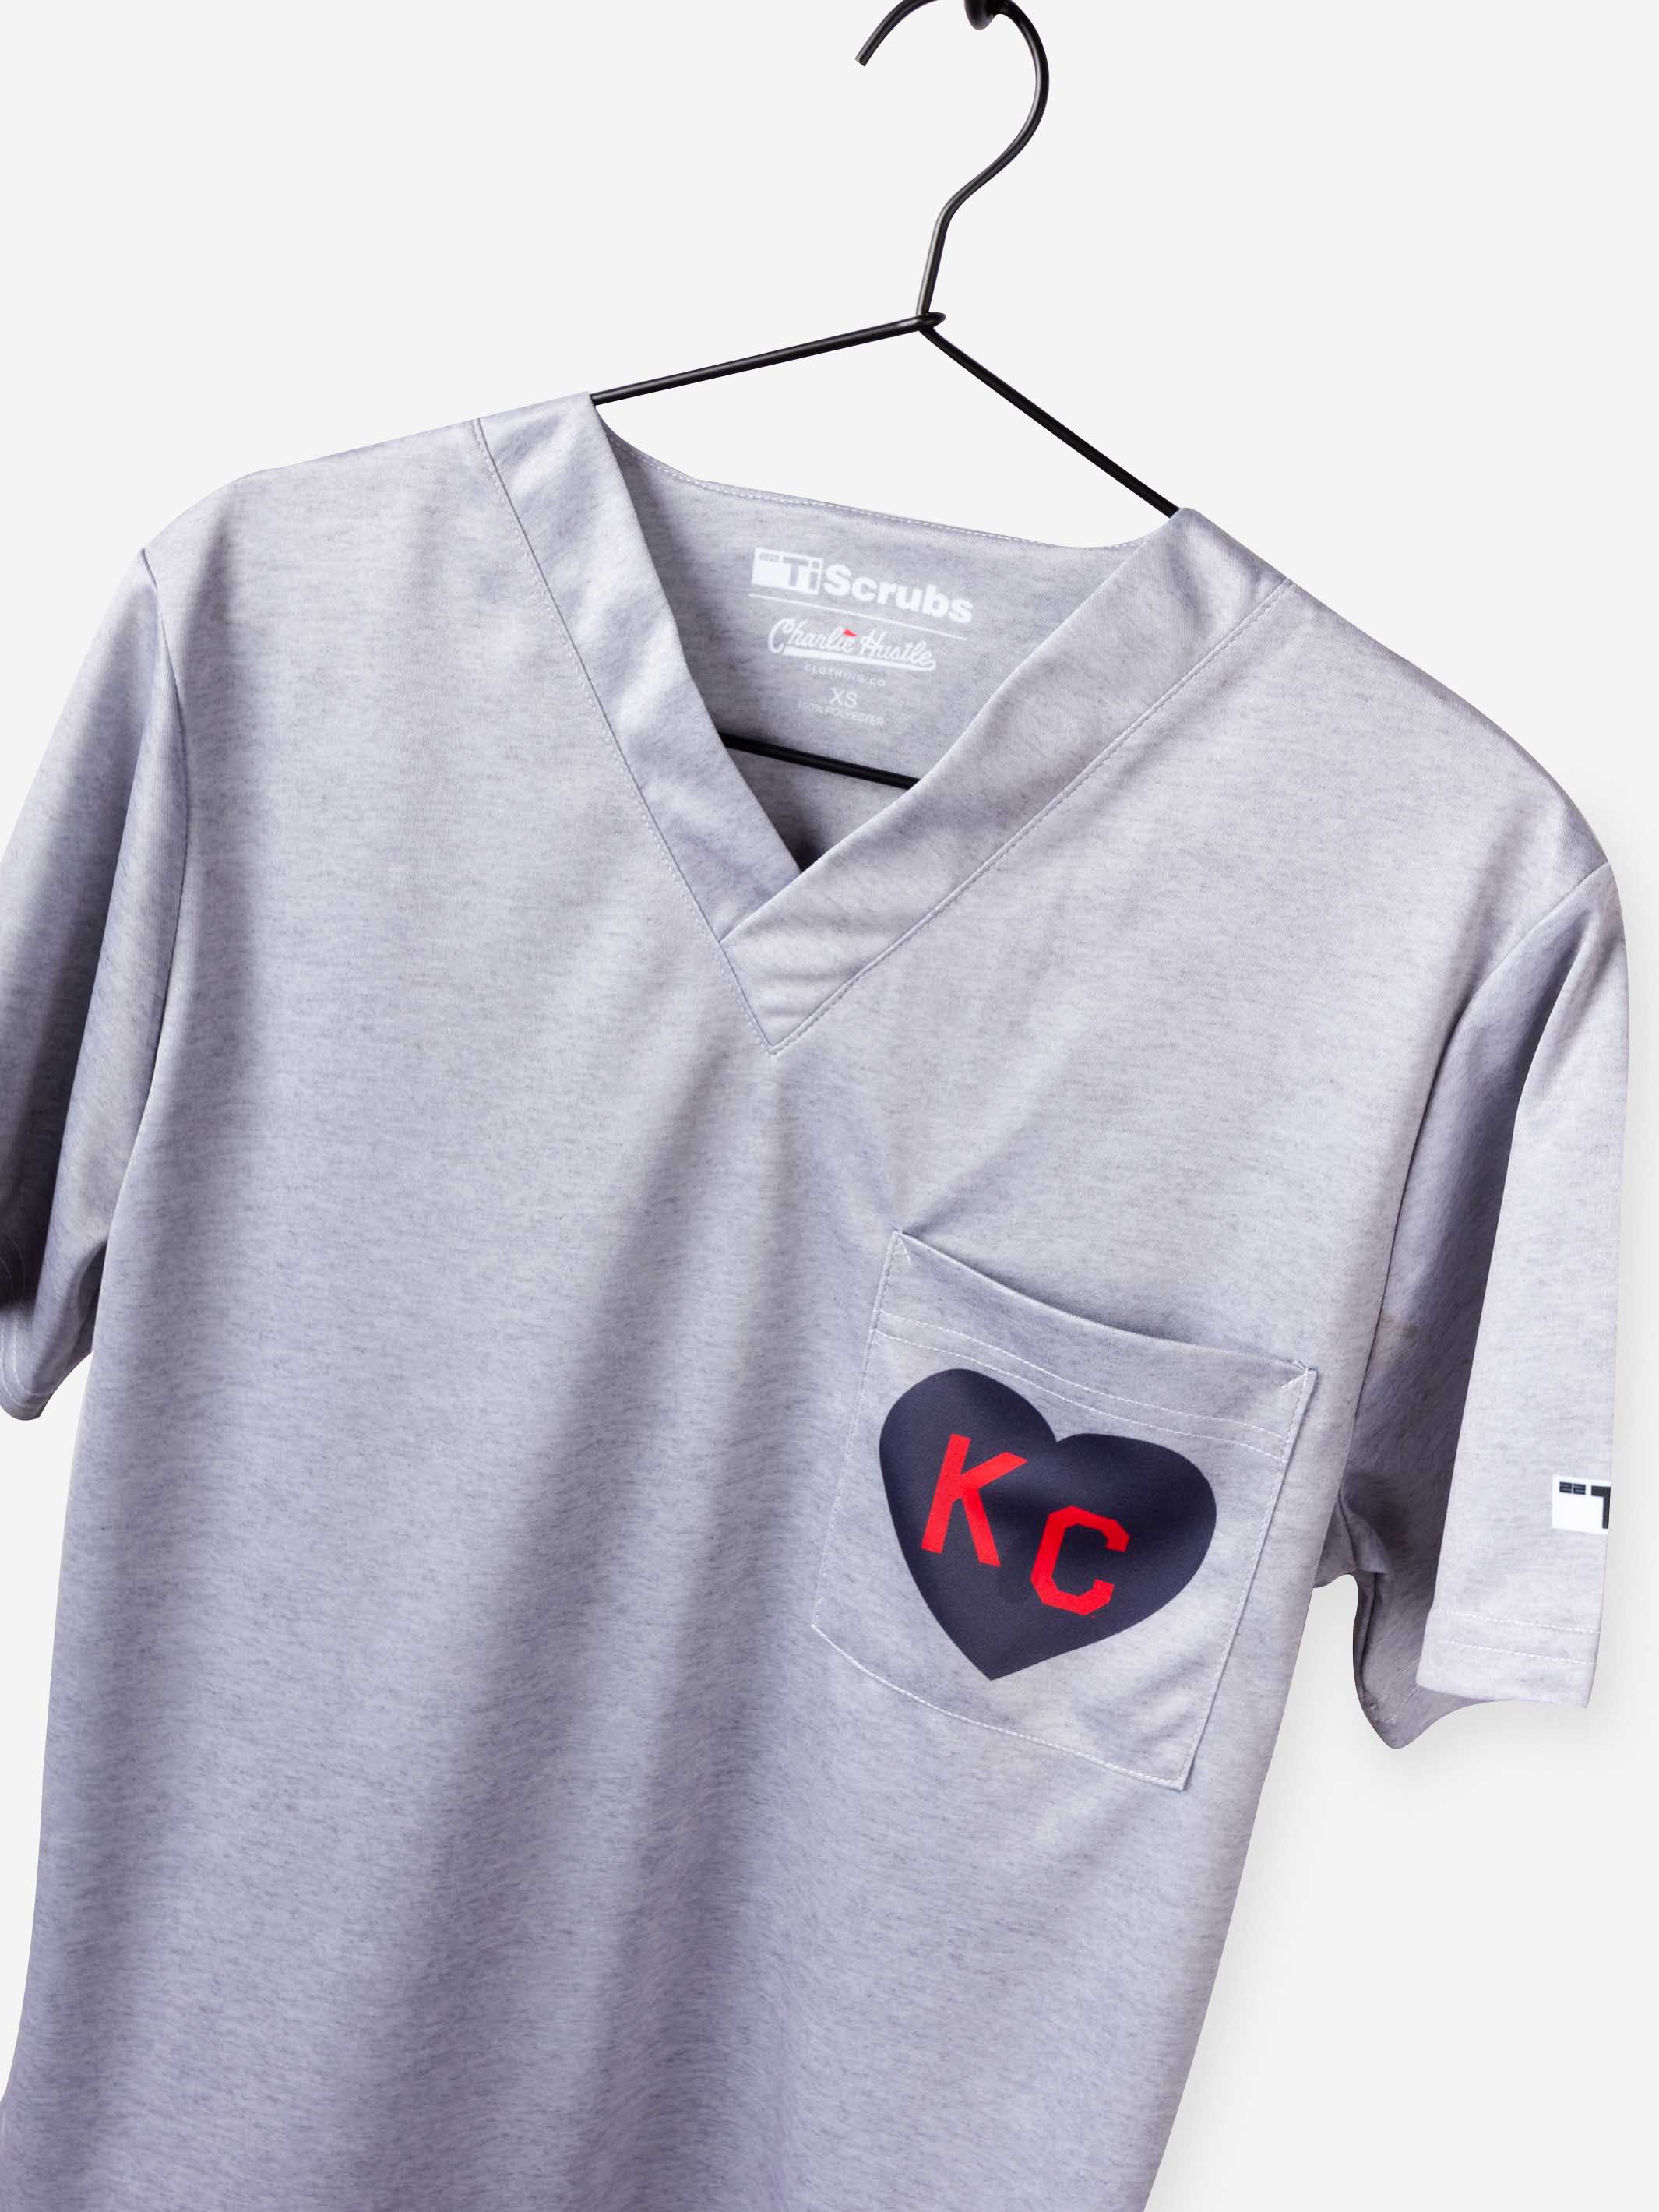 Men&#39;s Charlie Hustle KC Heart Scrub Top in Red and Navy with chest pocket heather gray